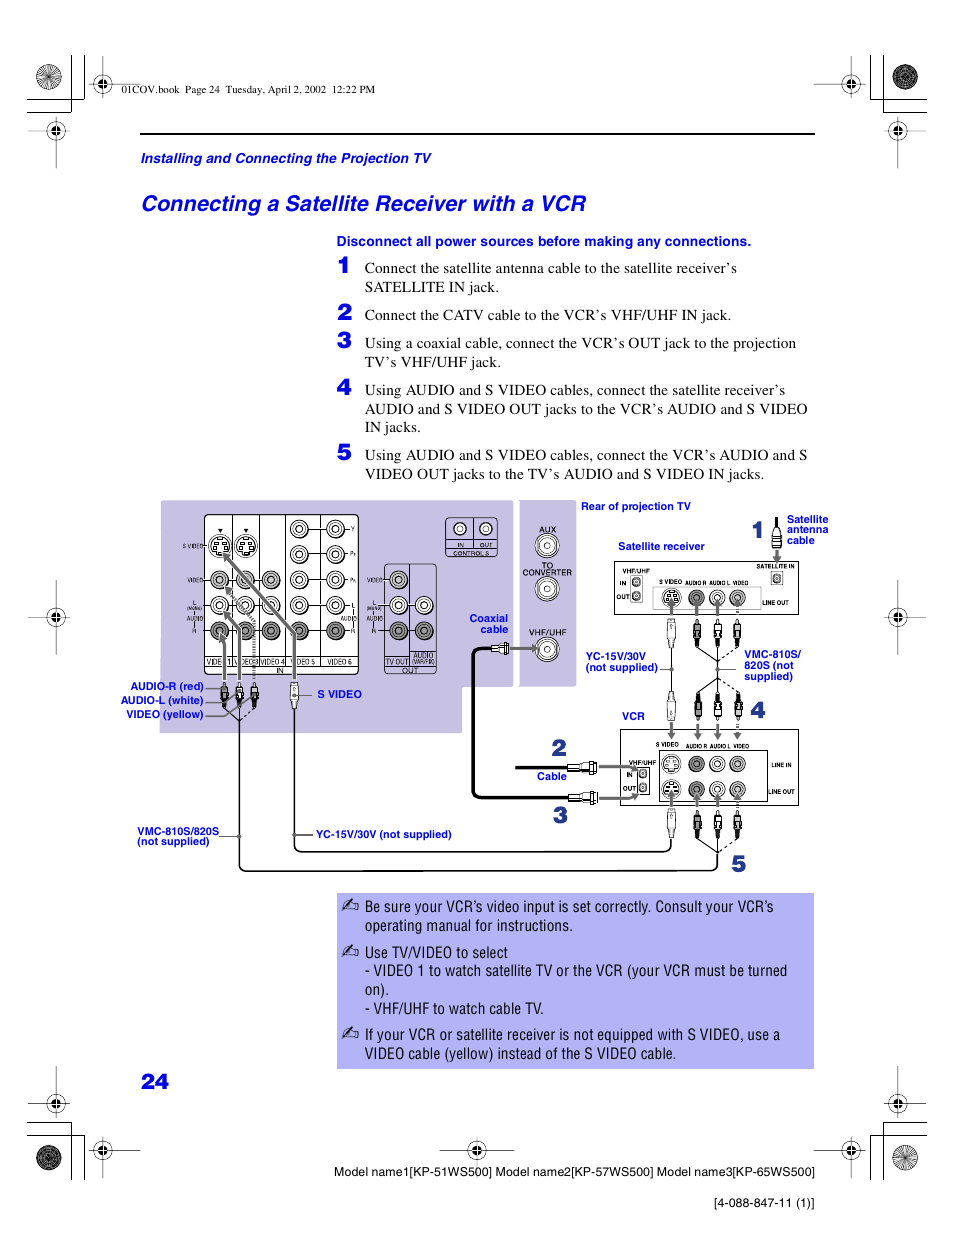 Connecting a satellite receiver with a vcr | Sony KP-51WS500 Manuel d'utilisation | Page 24 / 172